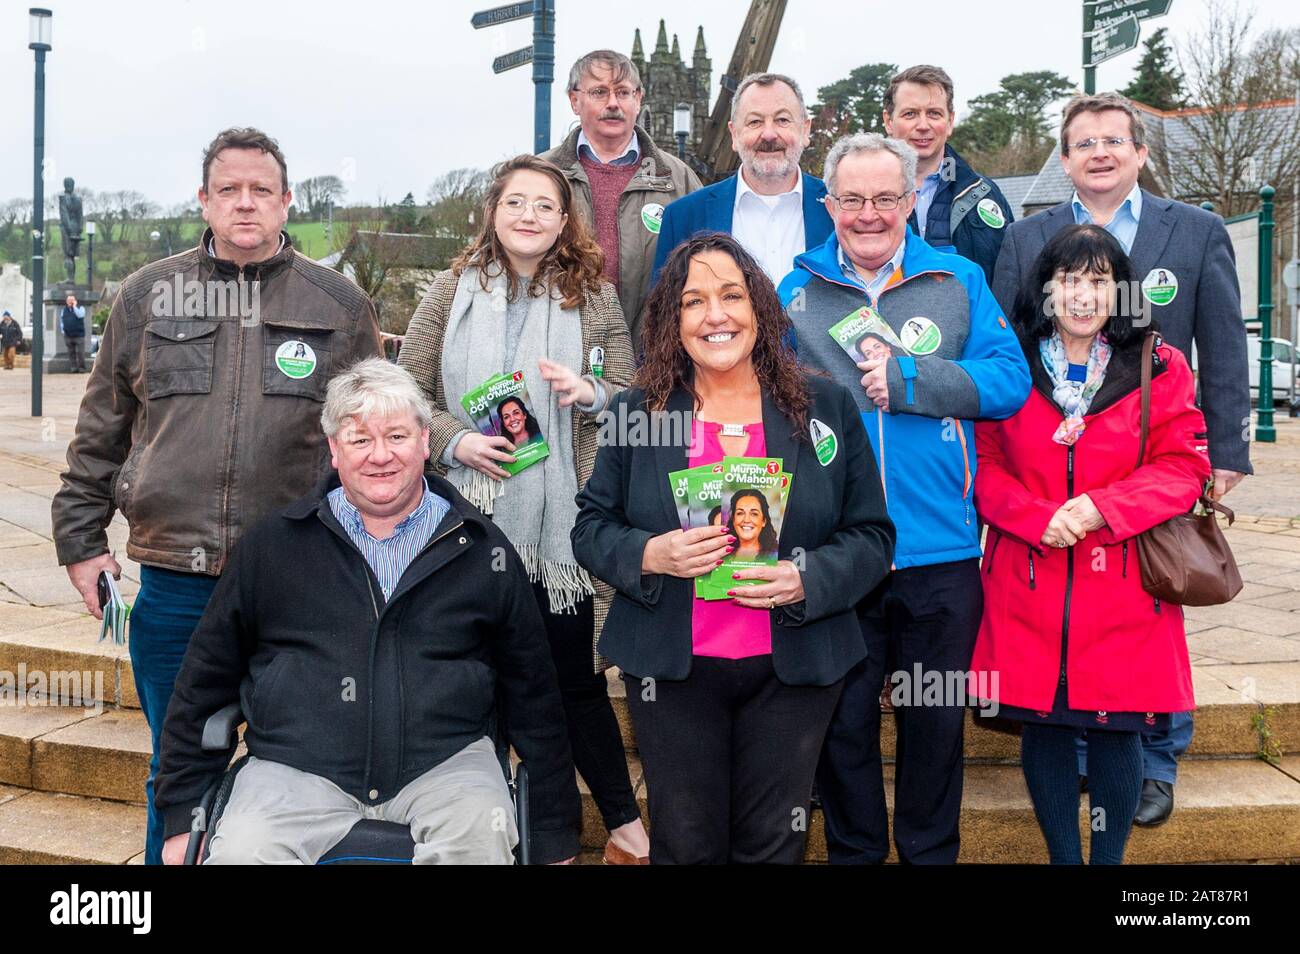 Bantry, West Cork, Ireland. 31st Jan, 2020. Bantry Friday Market was a hive of activity today with 4 general election candidates canvassing the locals. Magaret Murphy-O'Mahony TD was out and about canvassing with her team. Credt Credit: Andy Gibson/Alamy Live News Stock Photo